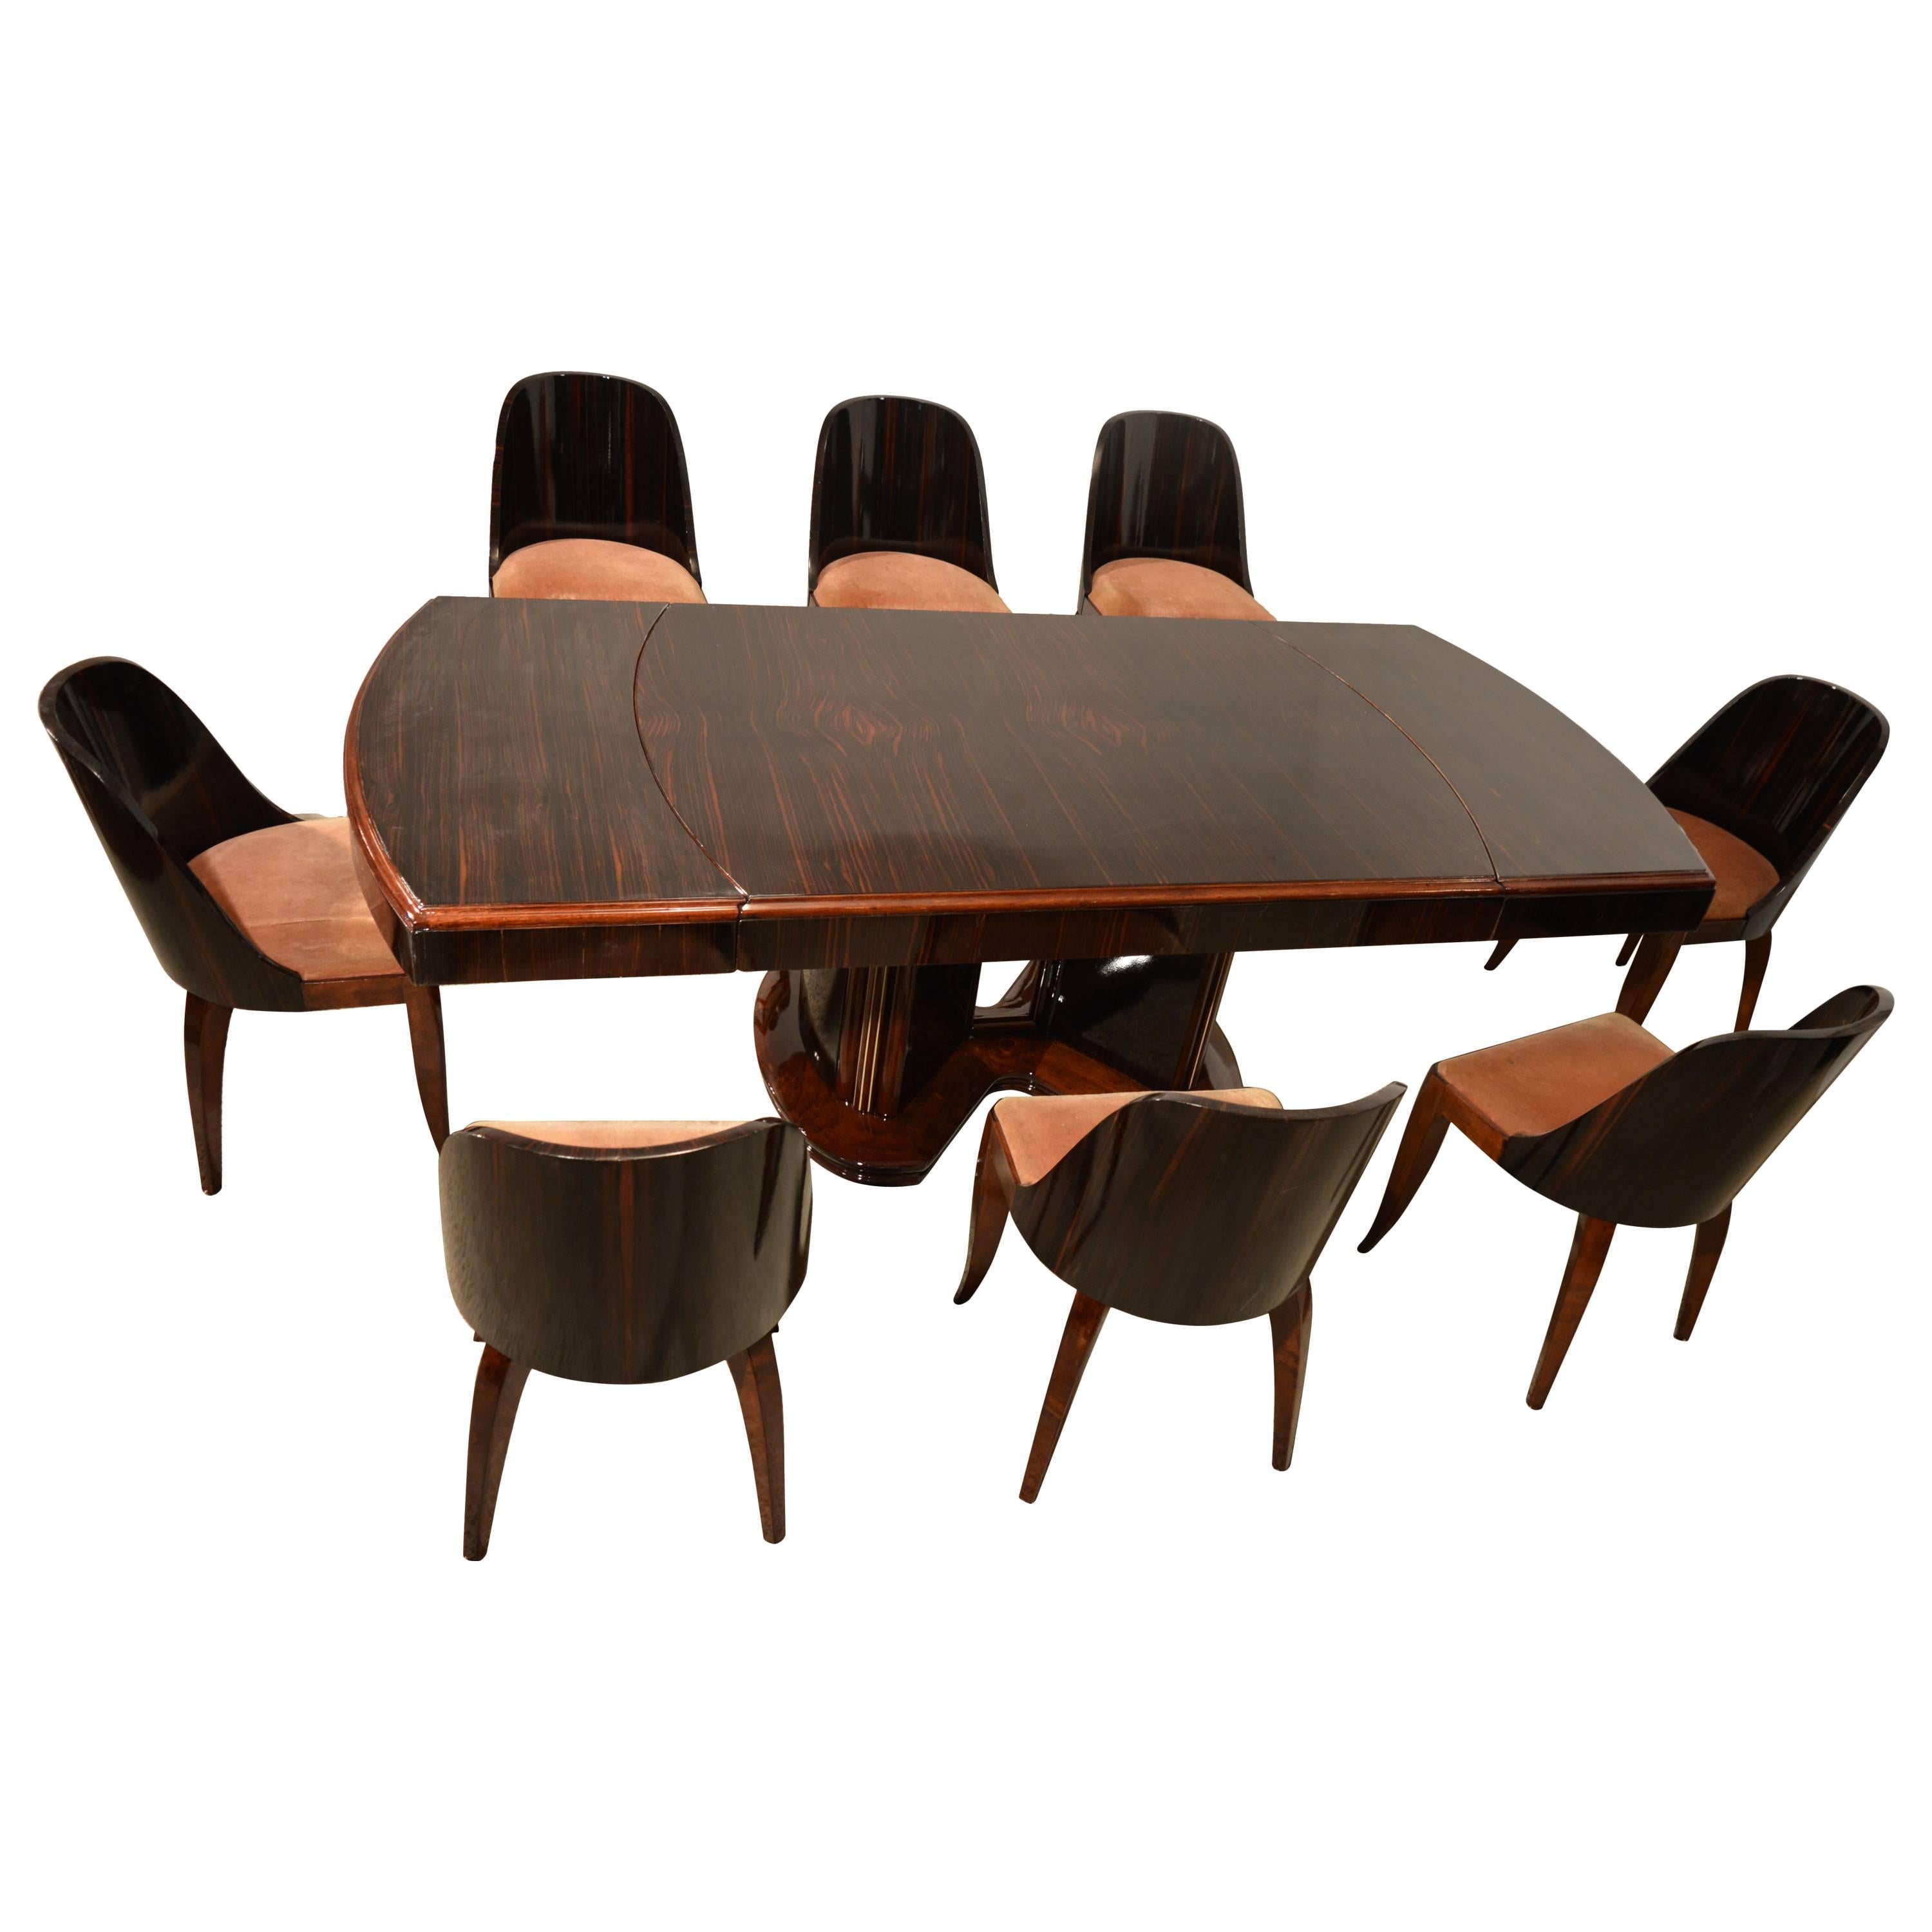 Art Deco Dining Table with Eight Chairs in Ebony Macassar